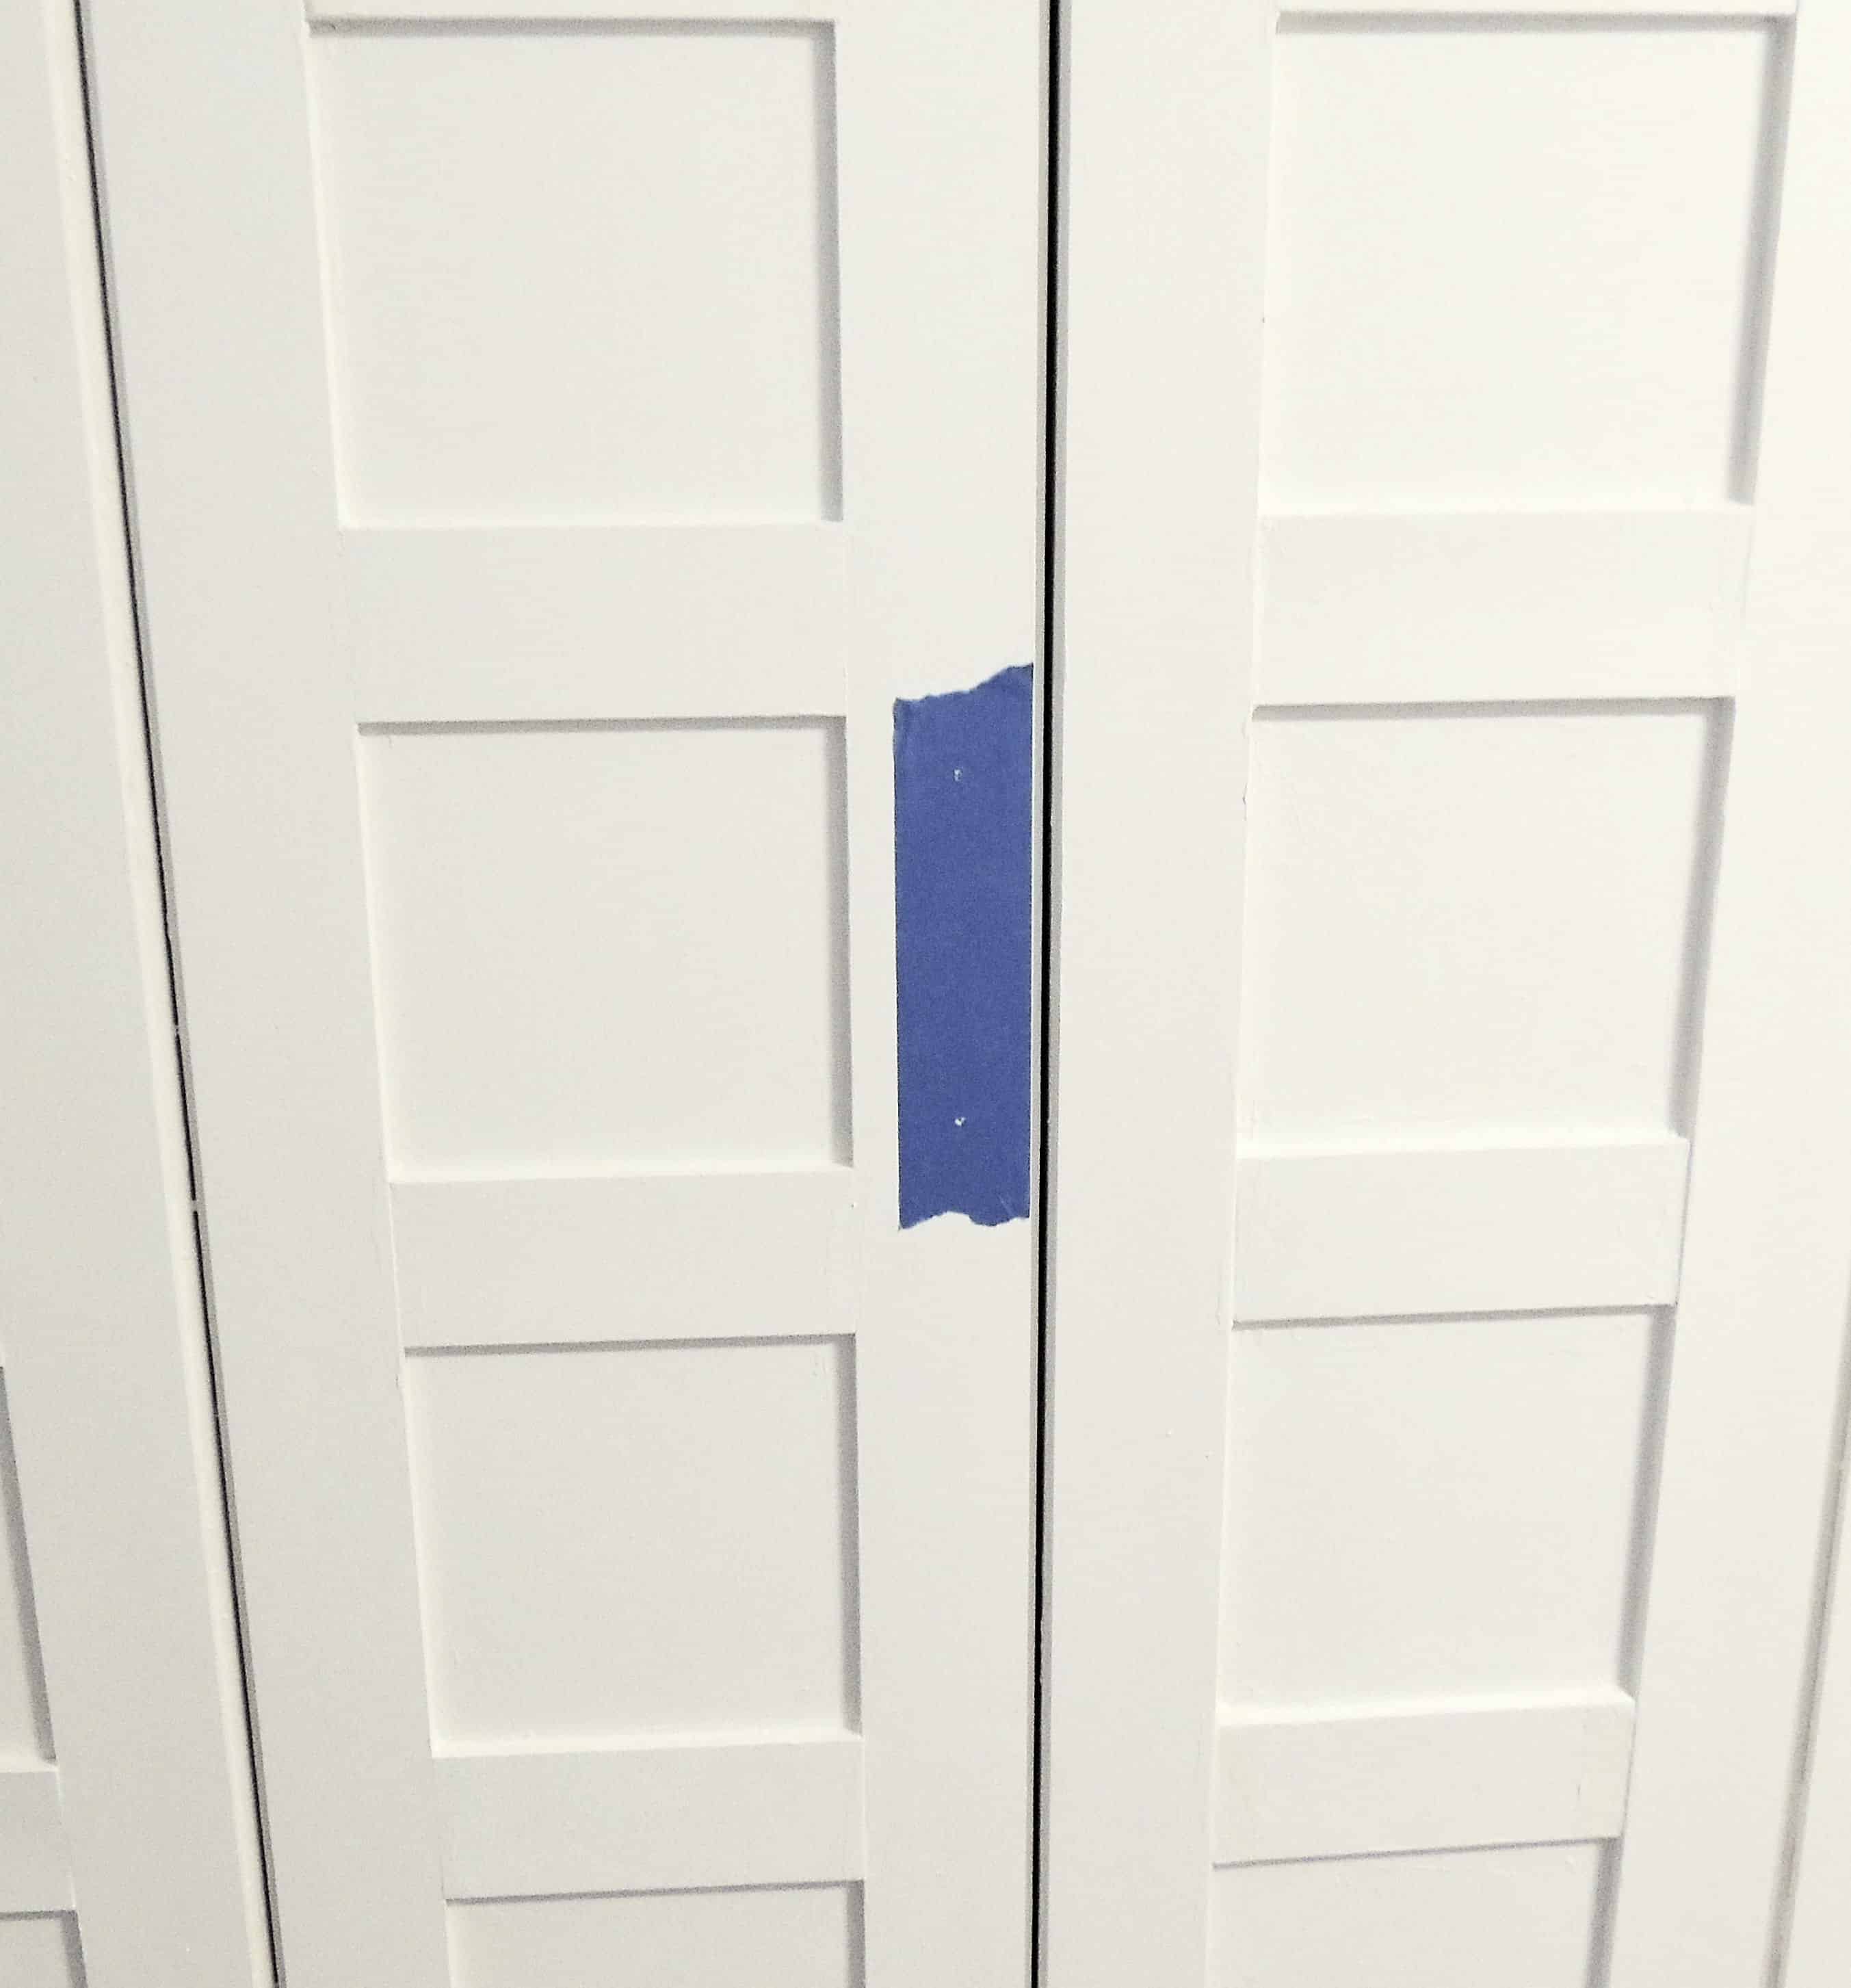 A quick tip to make a painter's tape template for aligning the door handles onto the closet doors